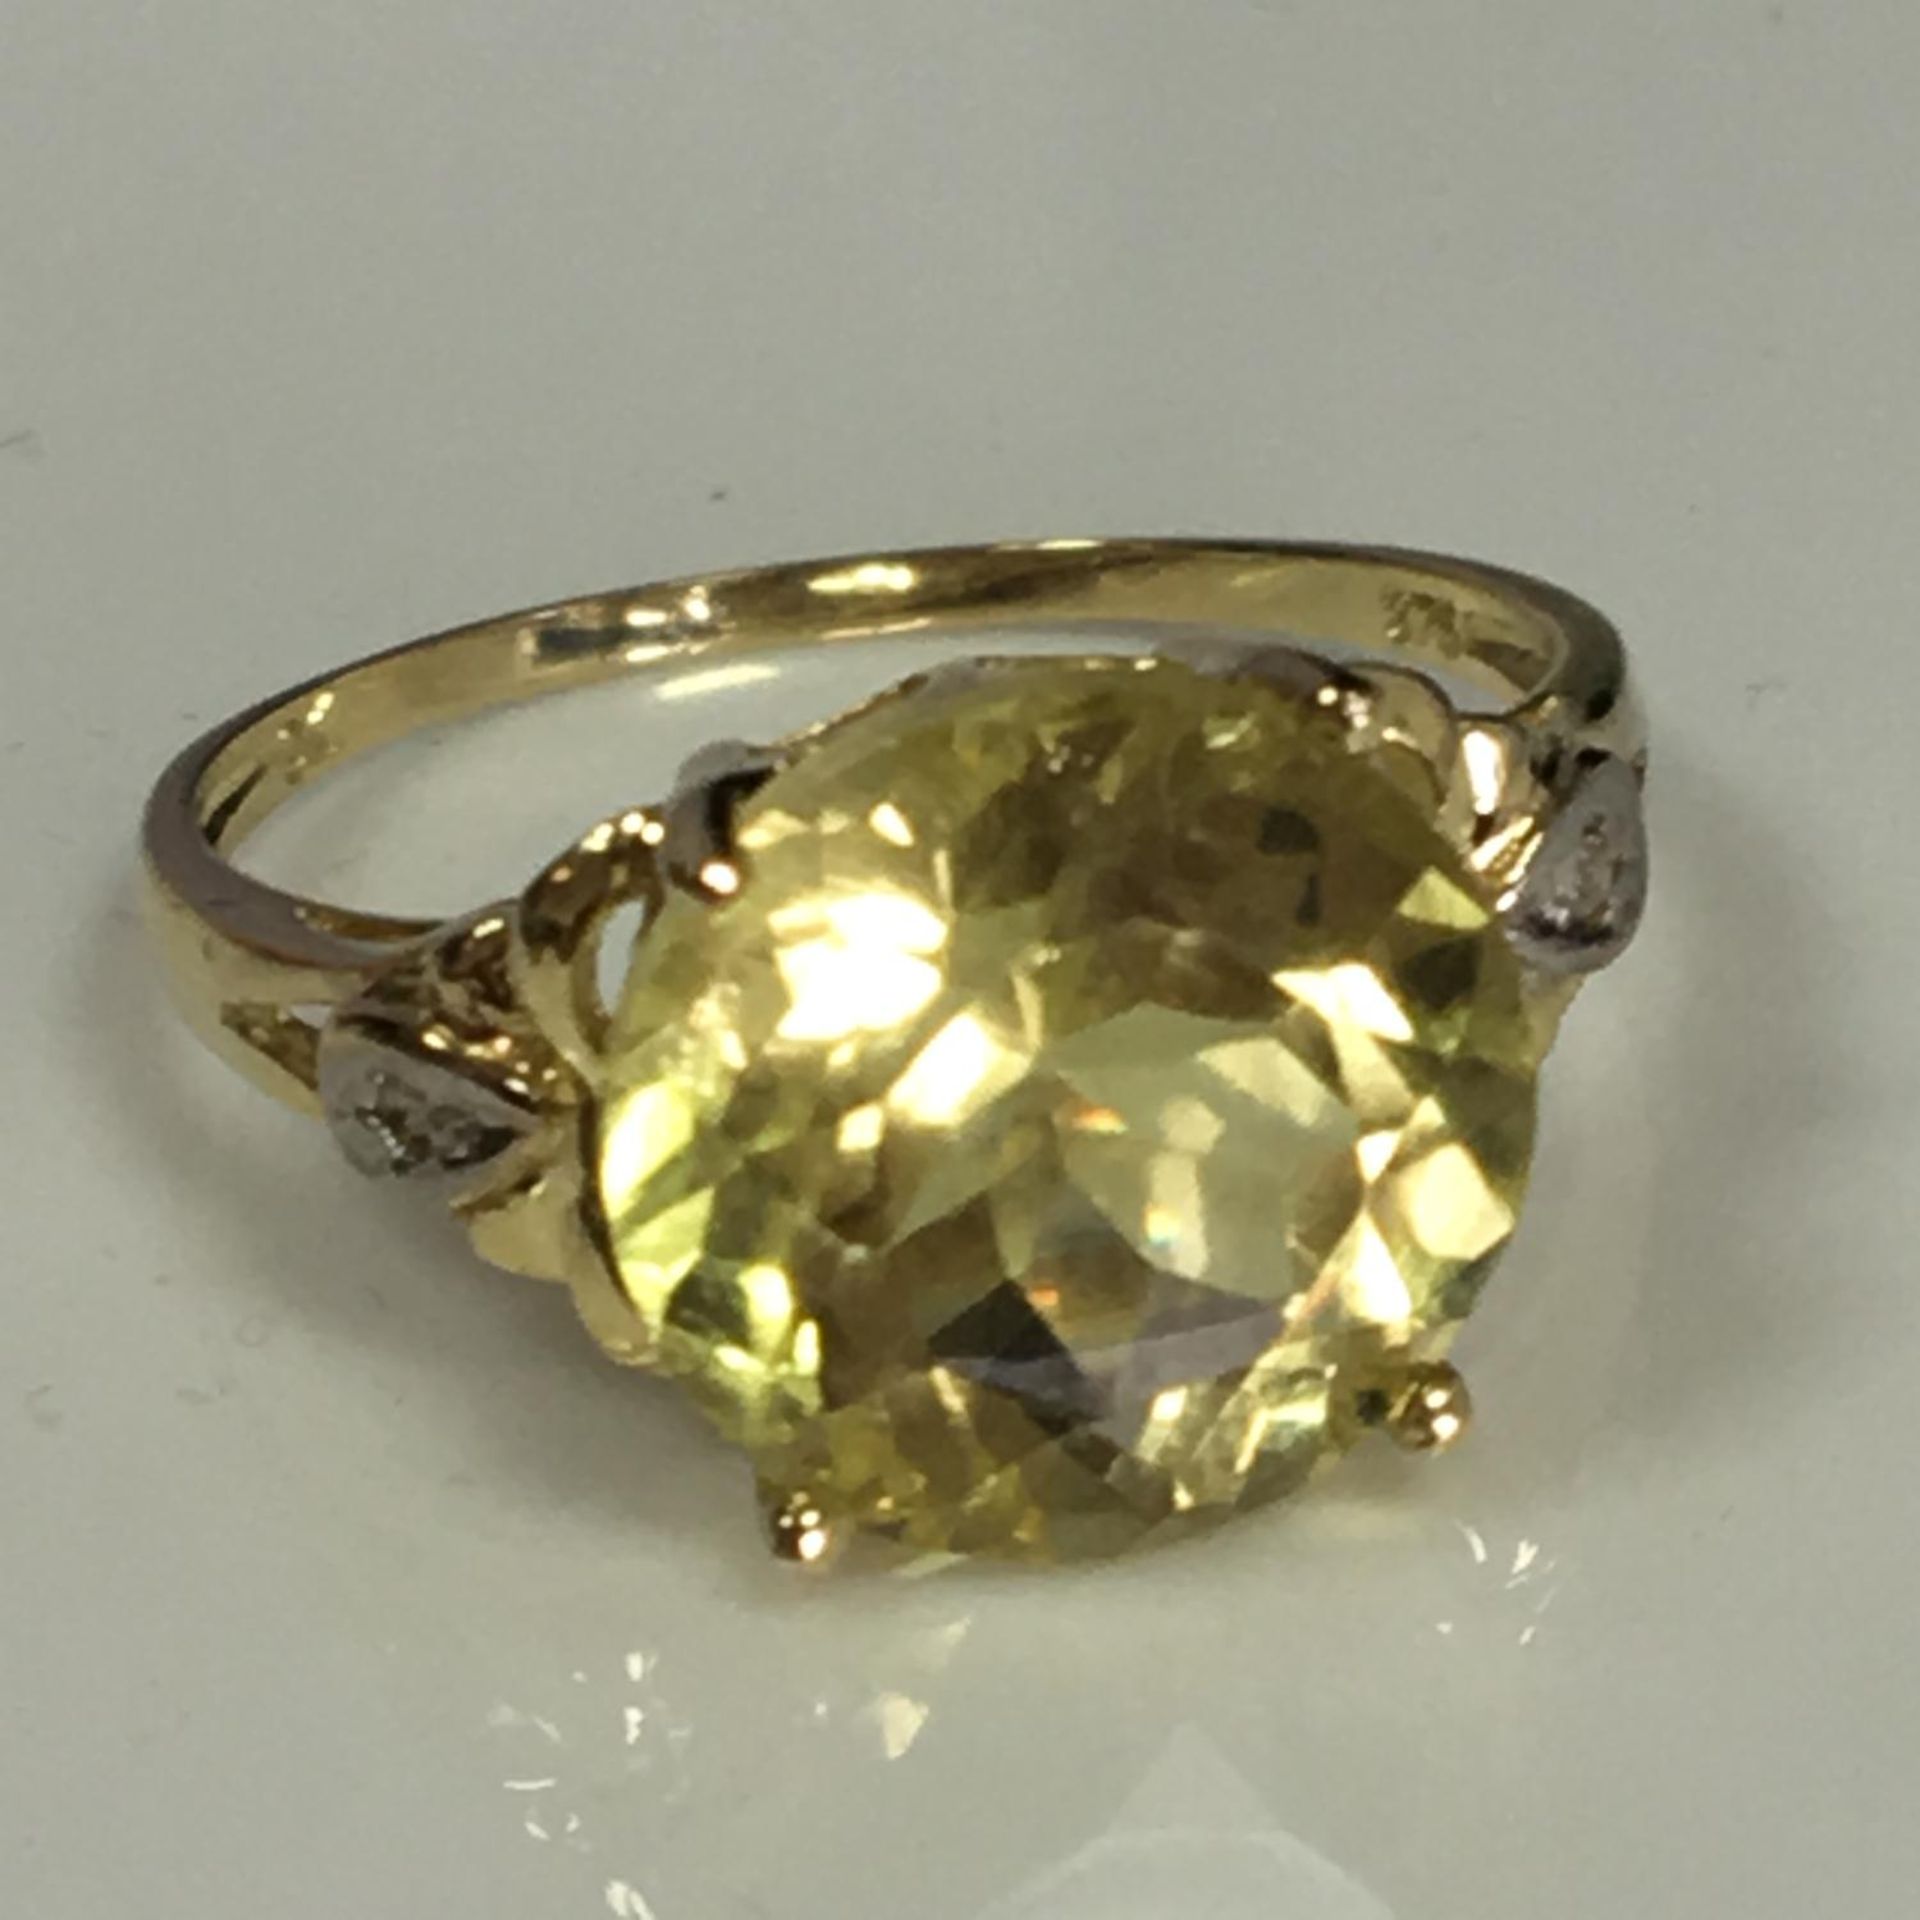 9ct gold ring (stamped 375) with an exceptionally large lemon quartz solitaire stone at 11mm